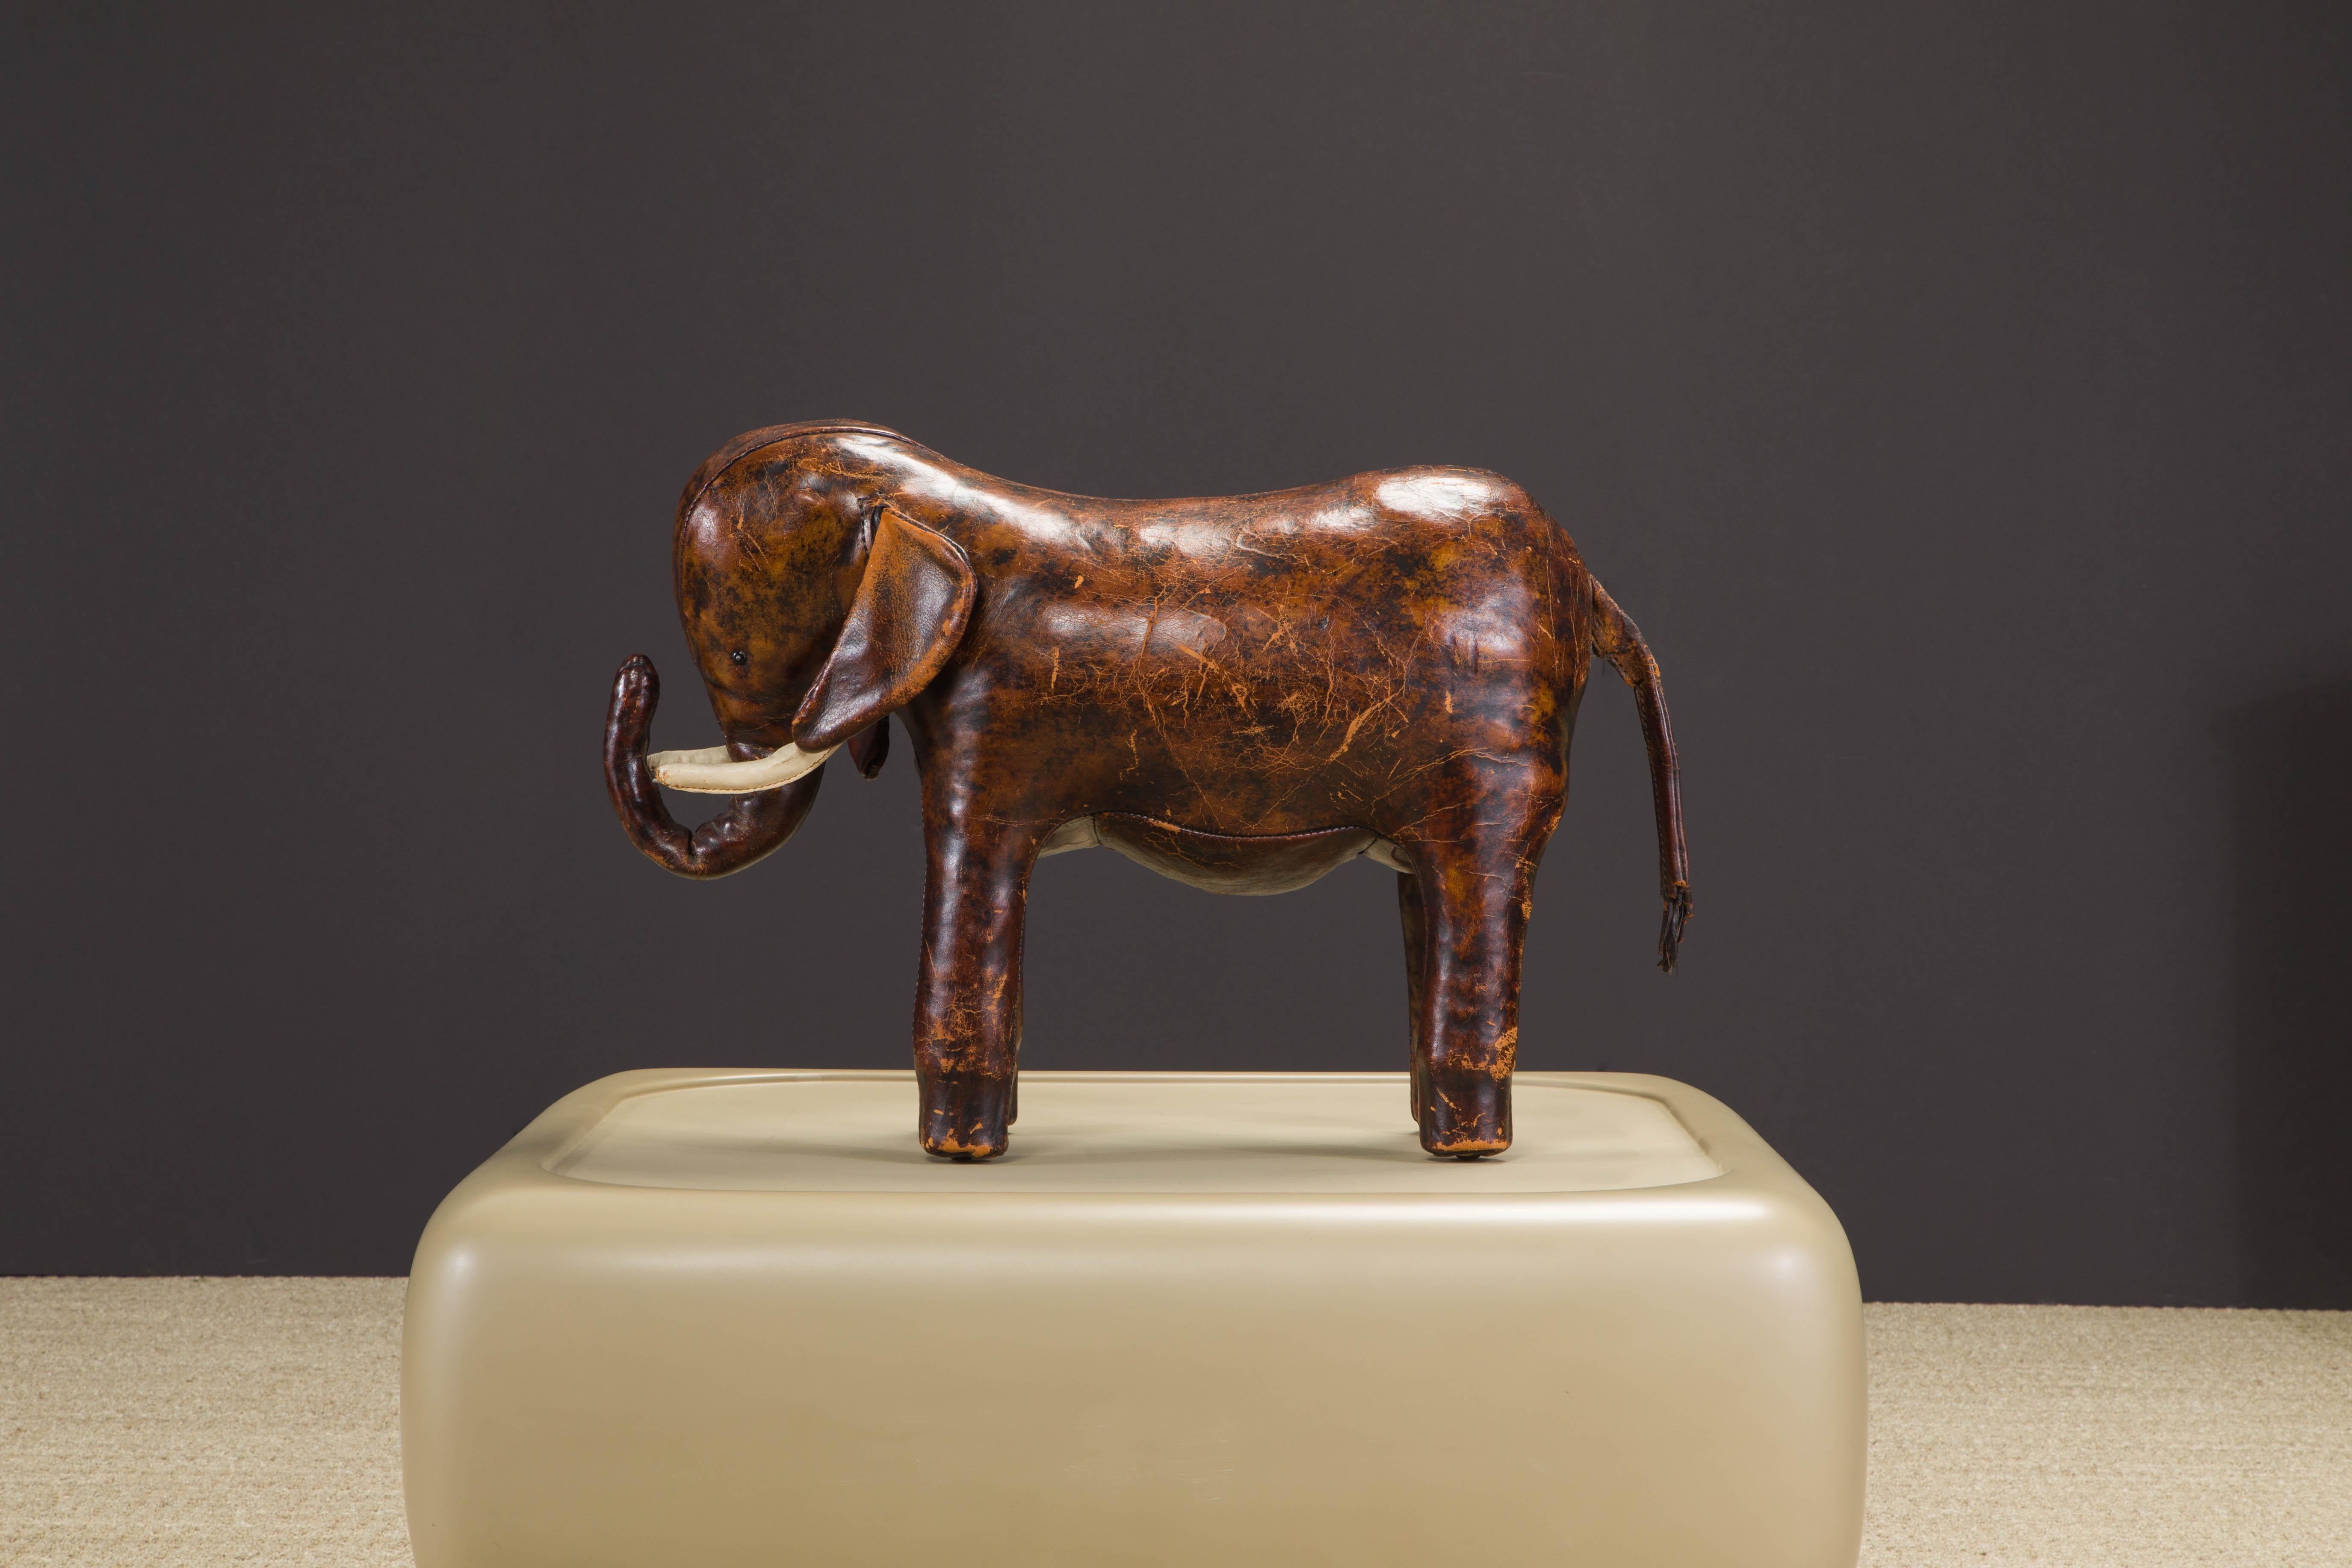 Mid-20th Century Leather Elephant Stool by Dimitri Omersa for Abercrombie & Fitch, c 1963, Signed